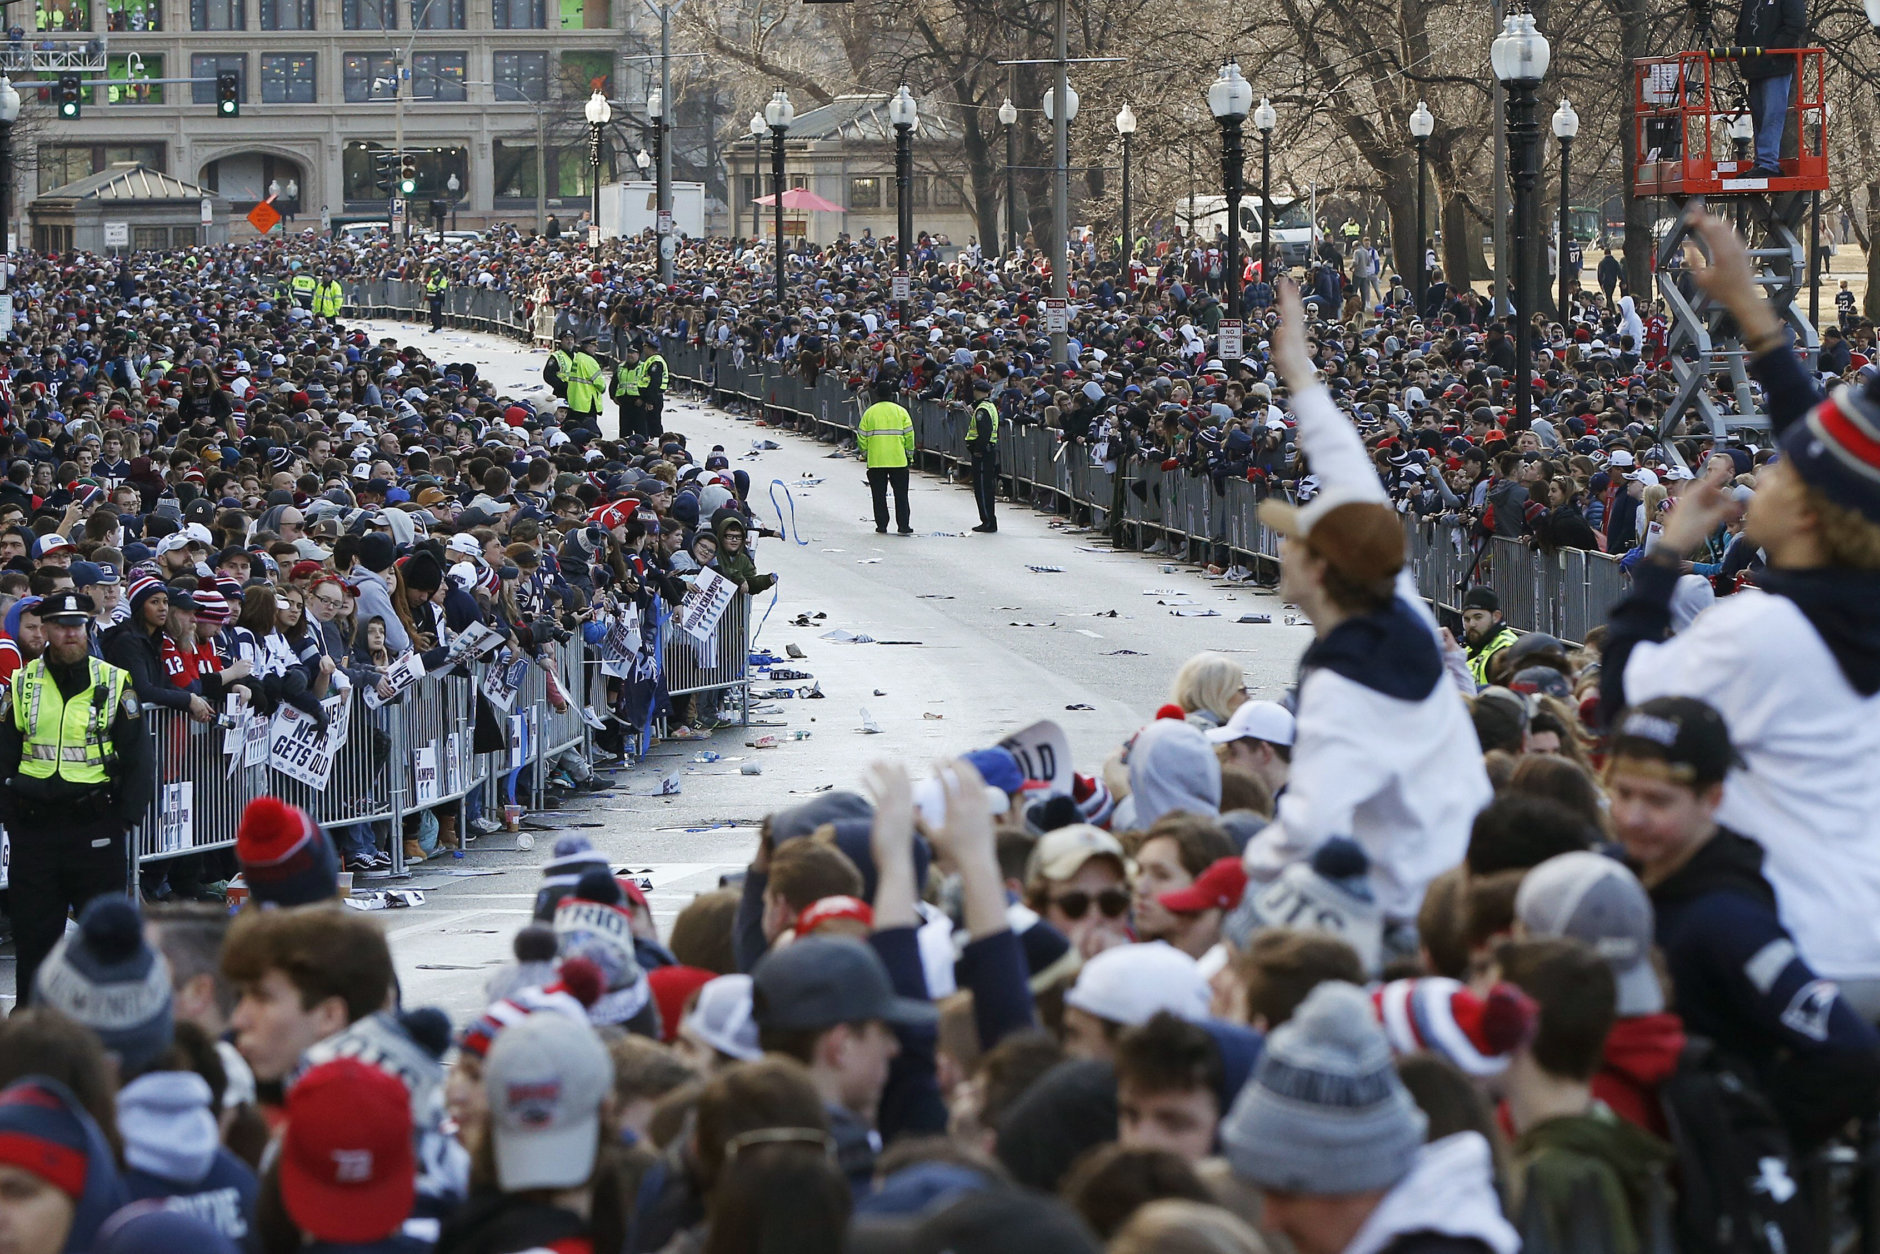 Fans line Tremont Street before the New England Patriots parade through downtown Boston, Tuesday, Feb. 5, 2019, to celebrate their win over the Los Angeles Rams in Sunday's NFL Super Bowl 53 football game in Atlanta. (AP Photo/Michael Dwyer)